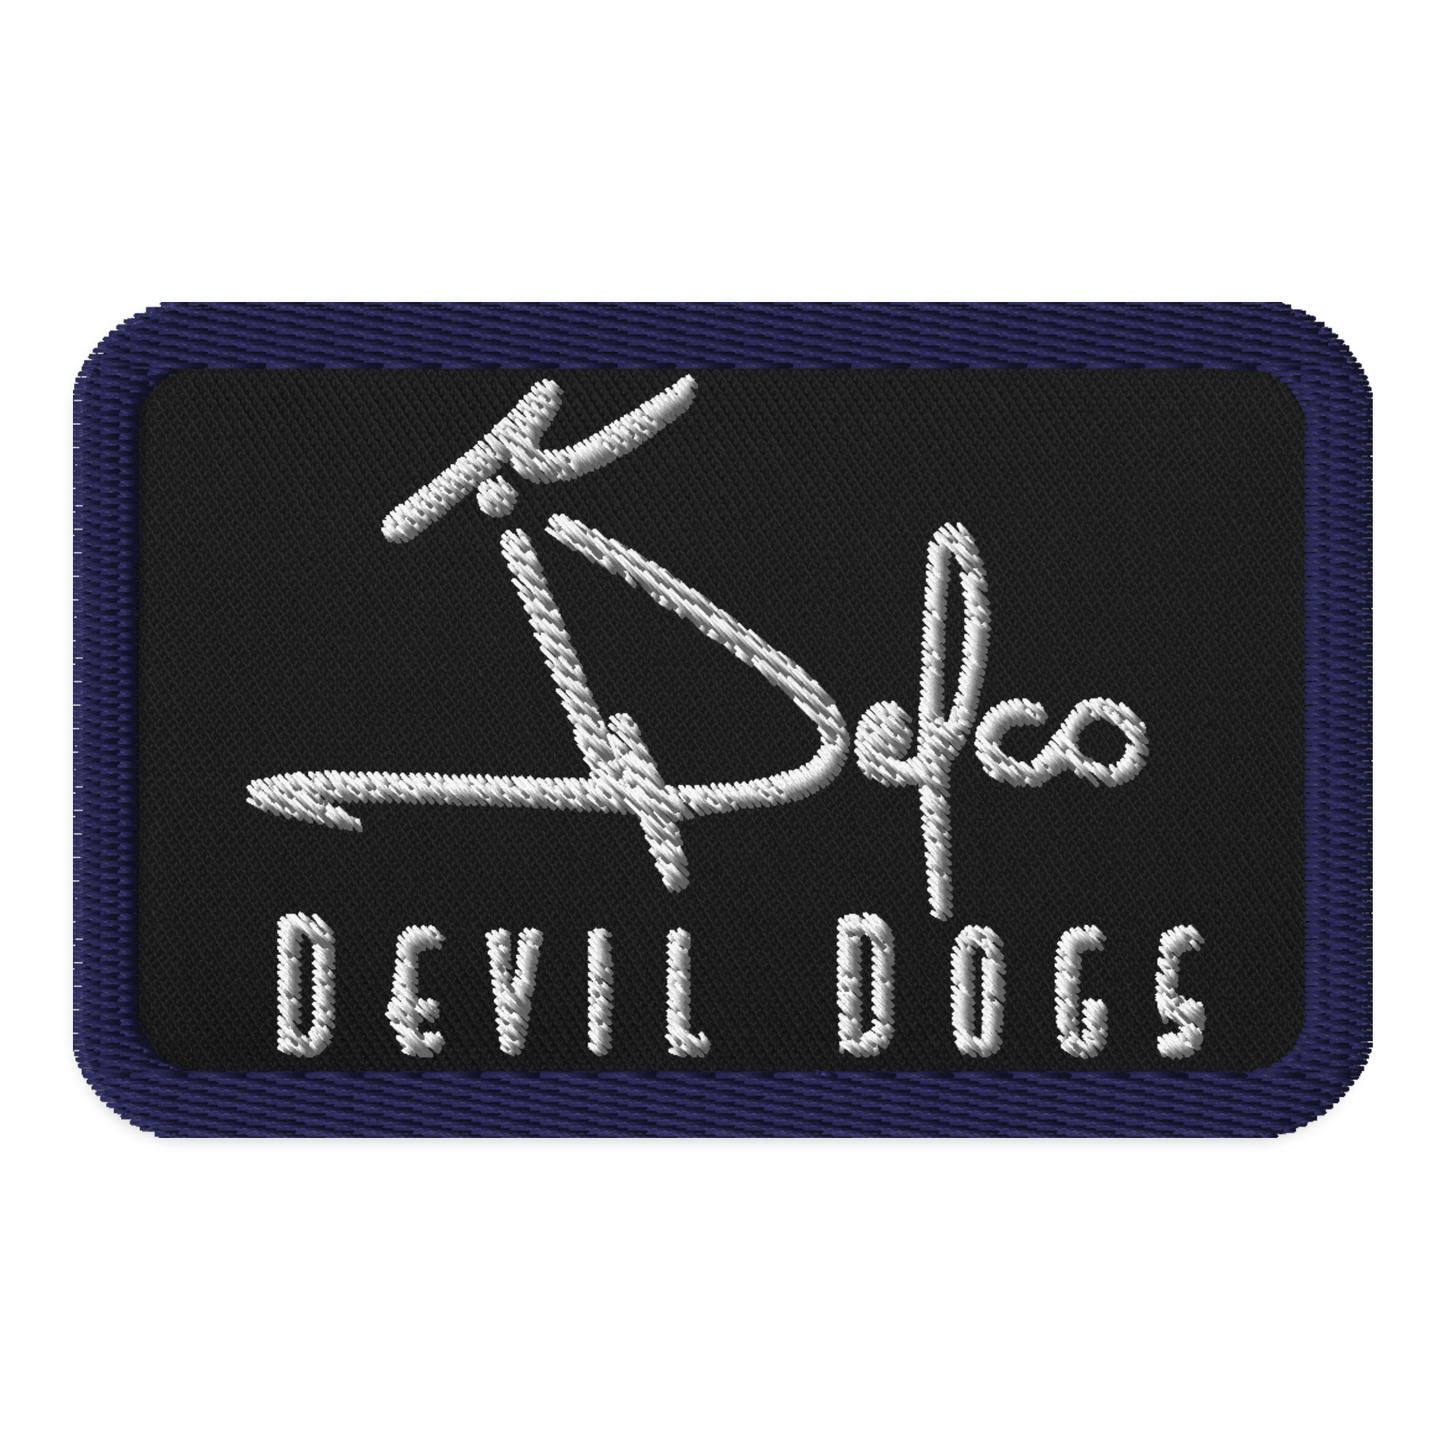 The 2023 Delco Patch